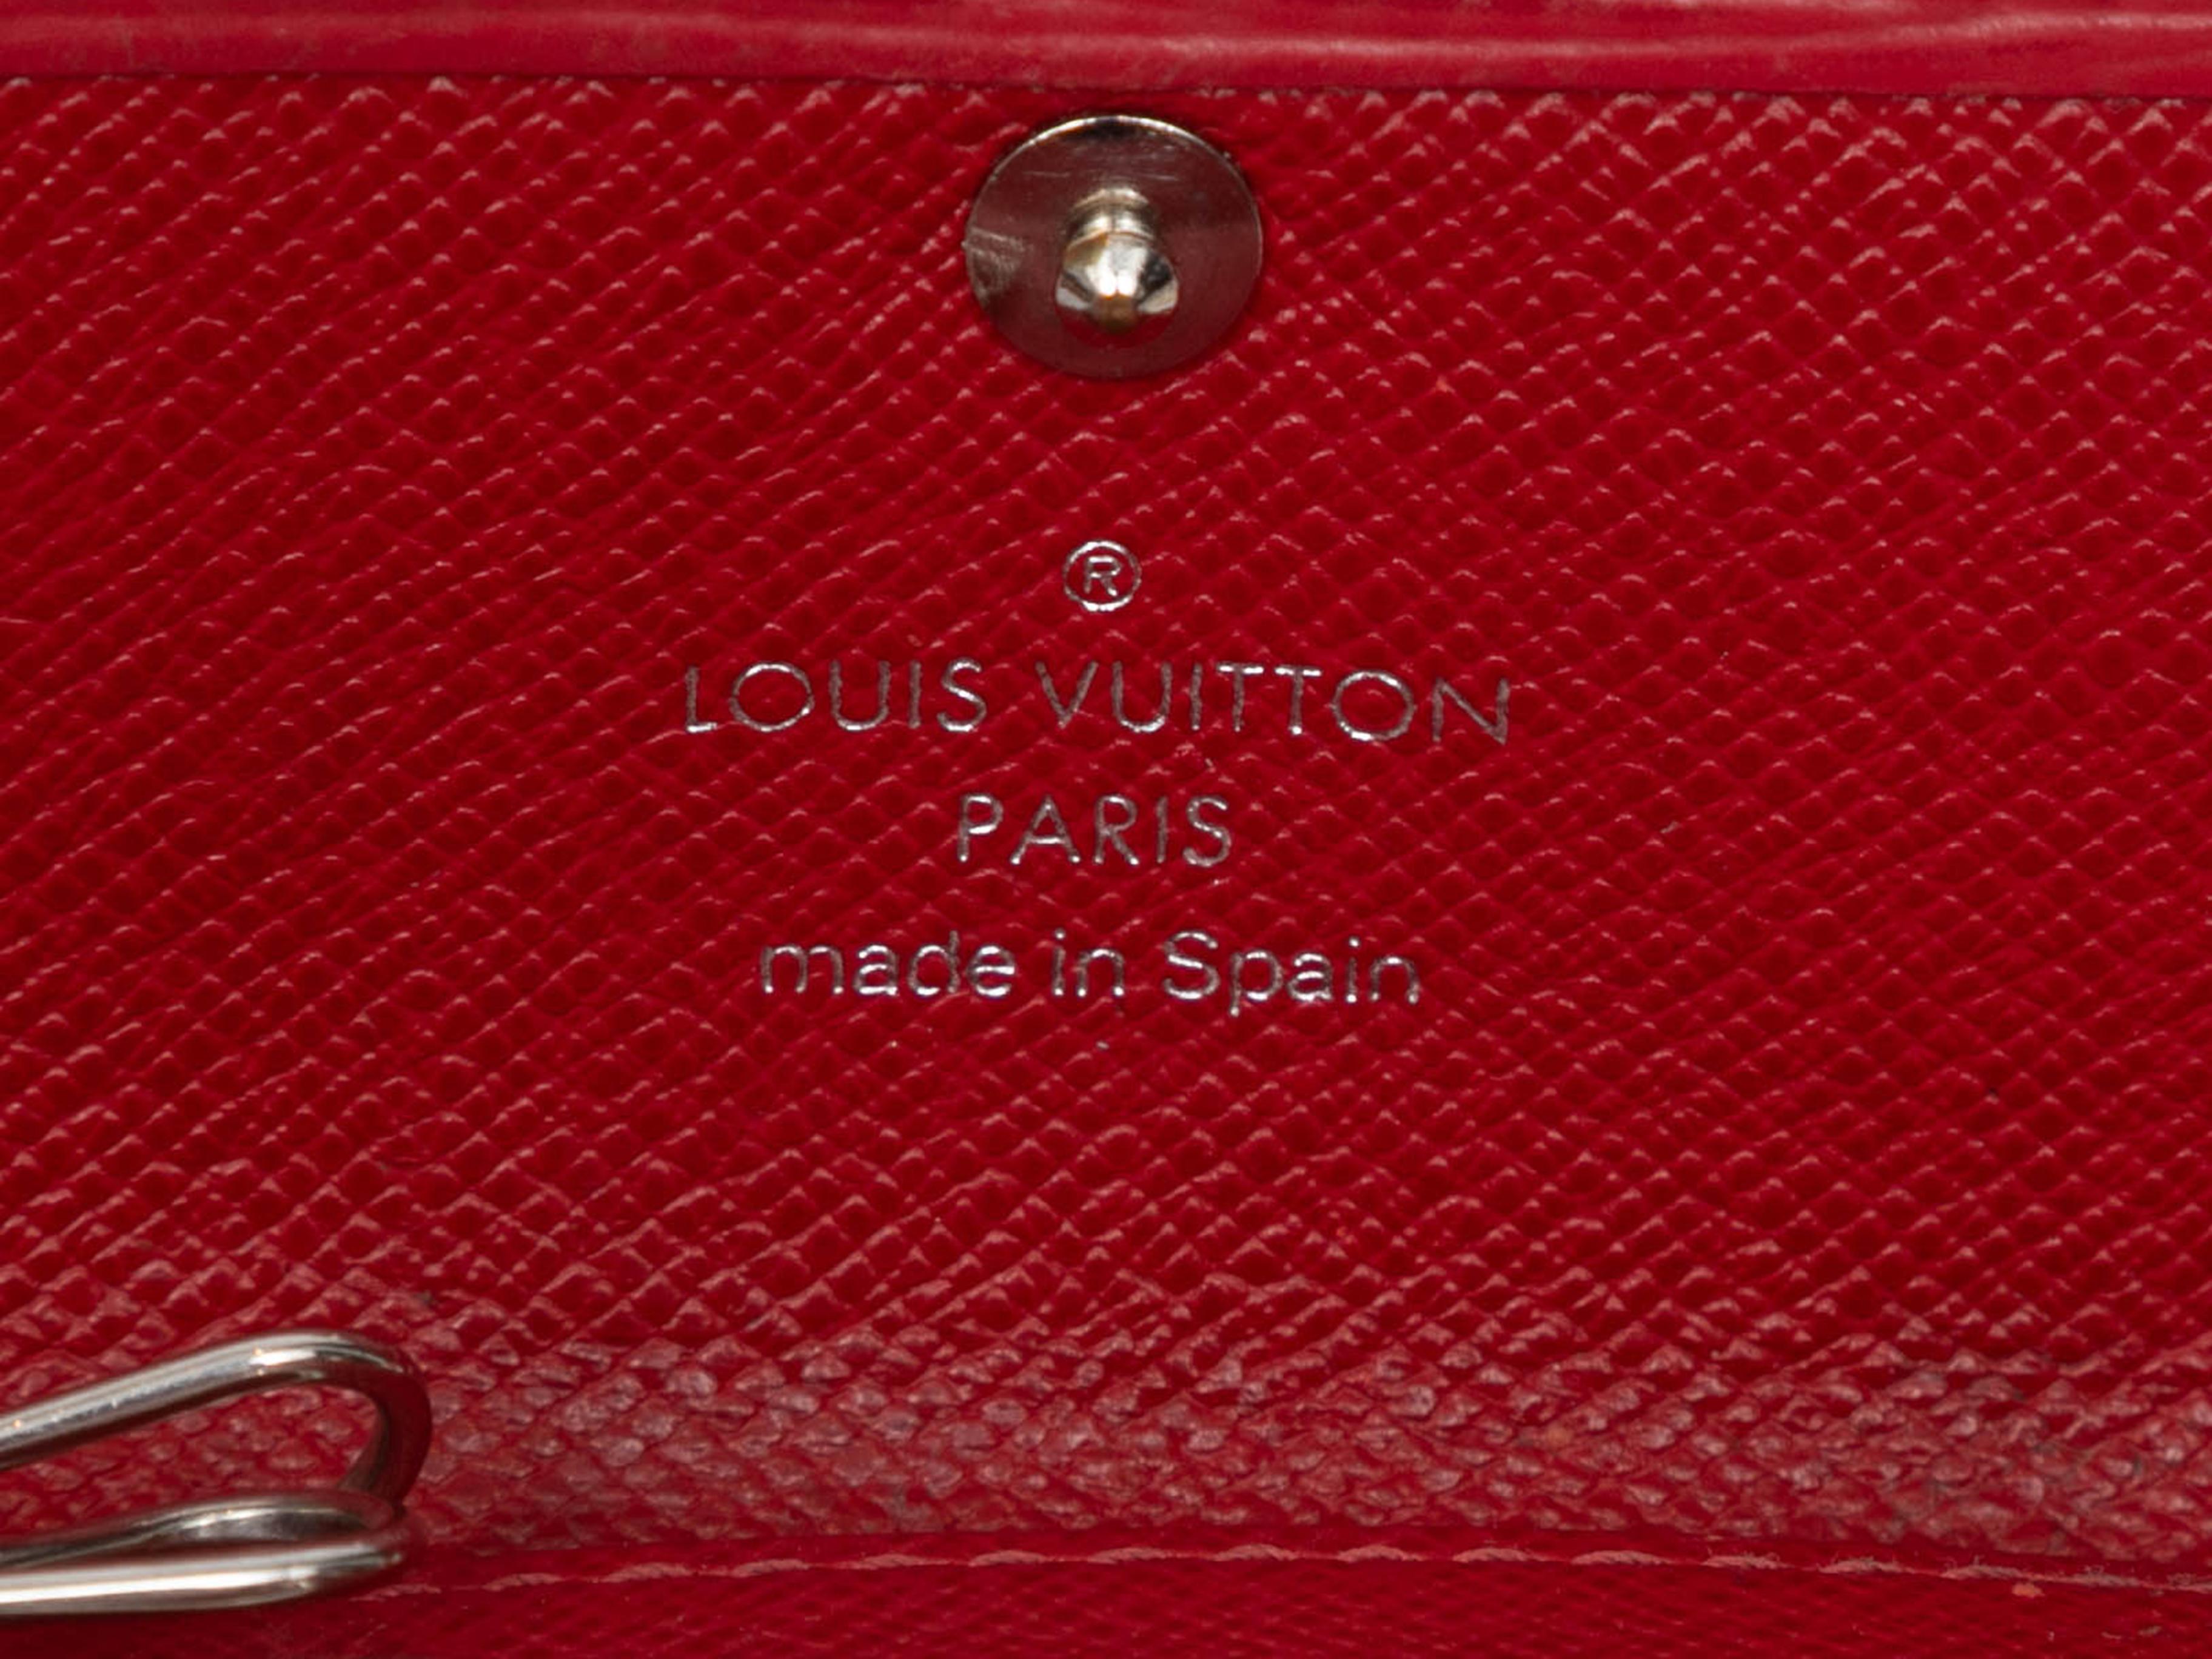 Red Epi leather key holder by Louis Vuitton. Silver-tone hardware. 2.5